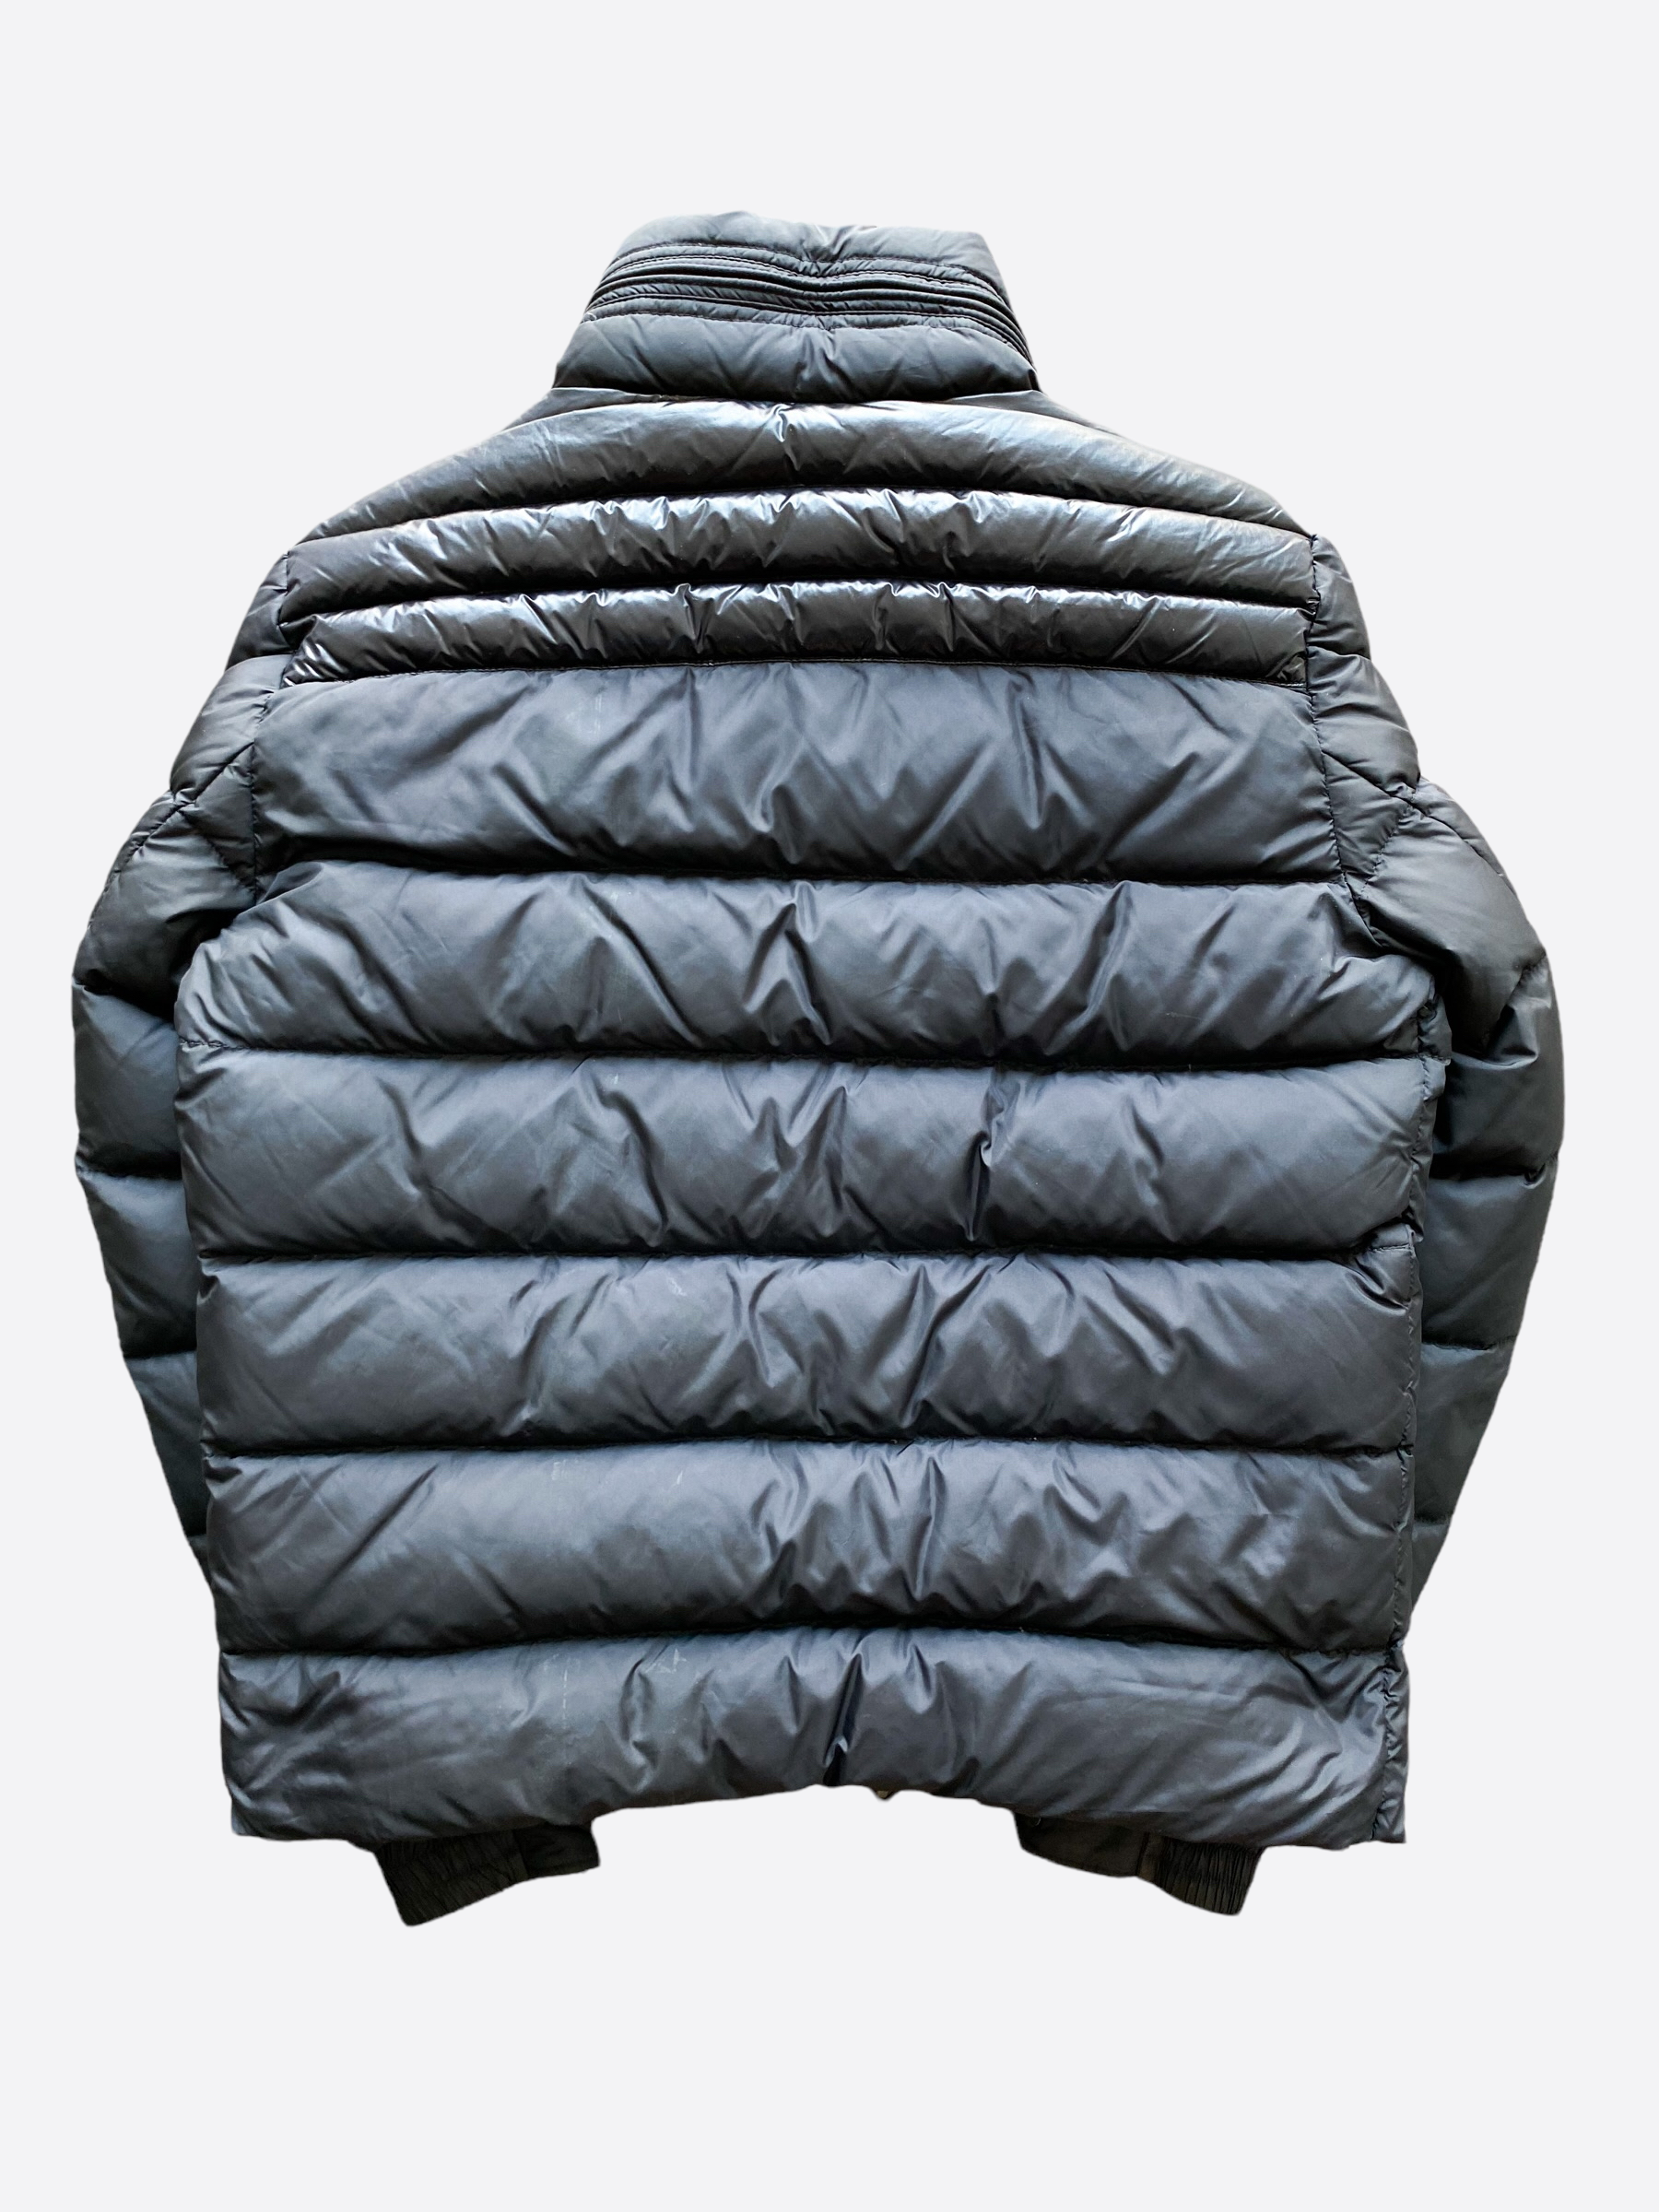 Moncler Puffer Vest Mens Medium with Hood Size M Mint Condition 